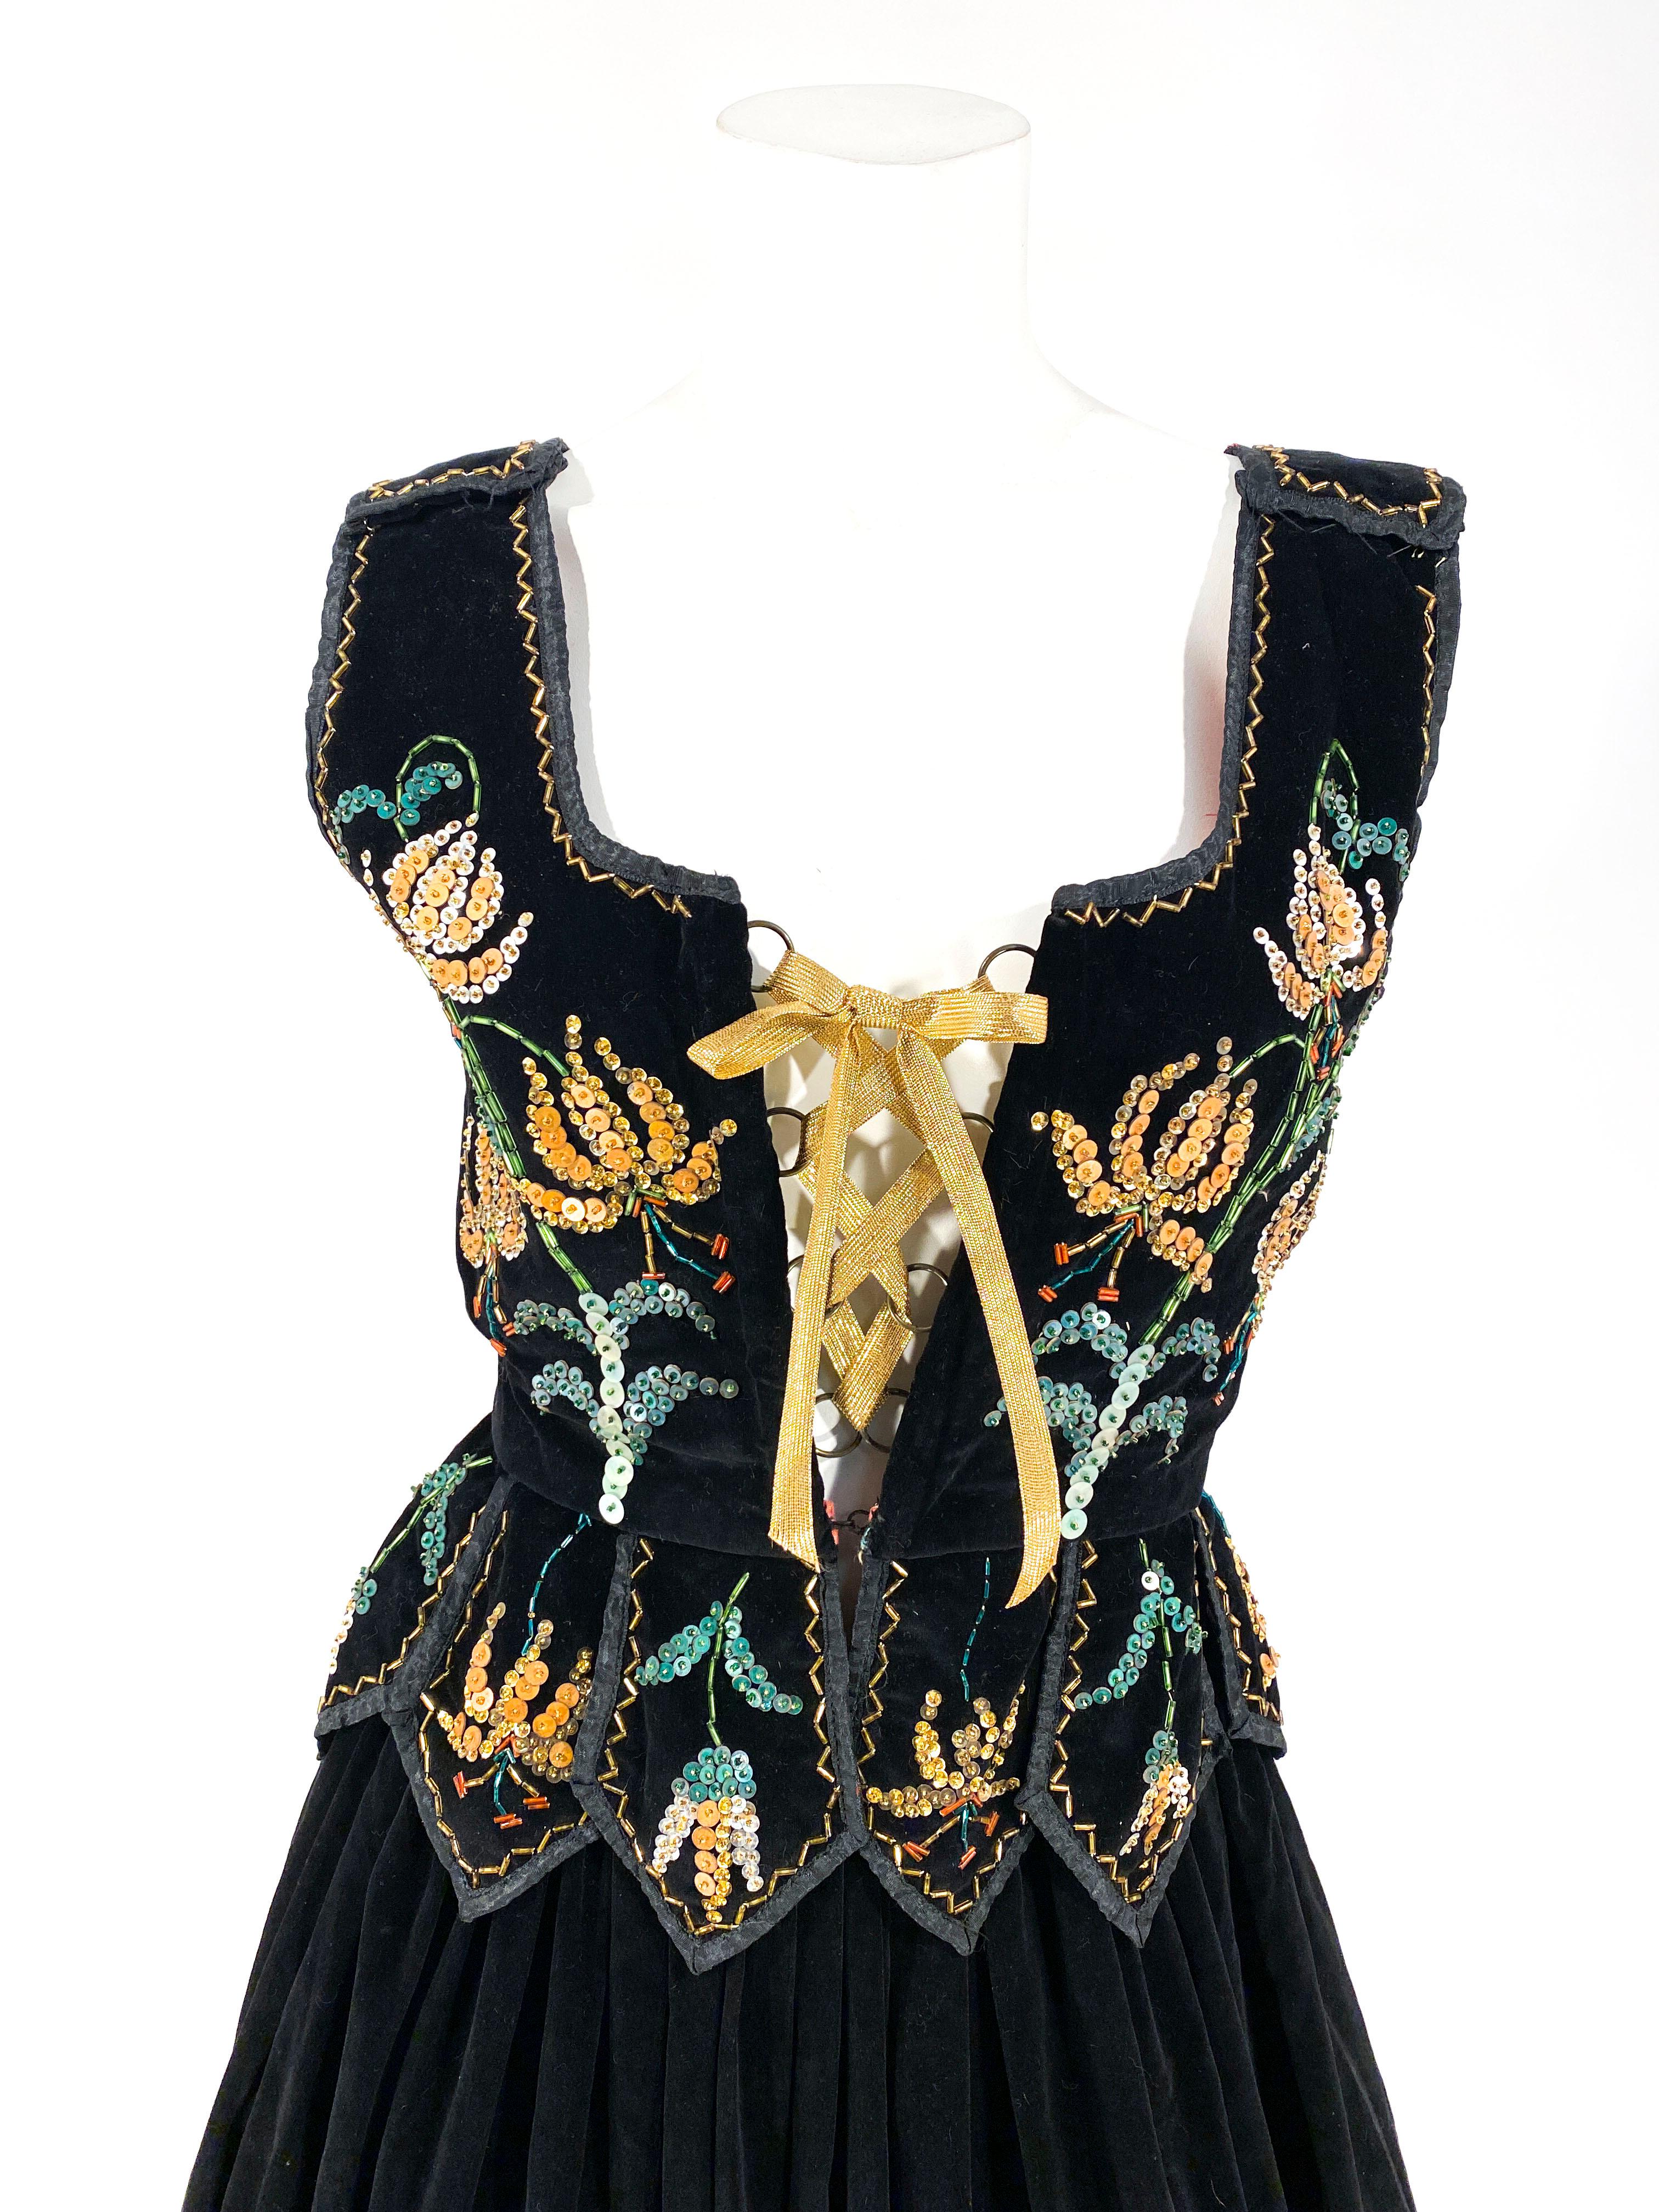 1930s Norther European peasant handmade costume with sequin and glass beading configured into an intricate floral pattern. The fitted tunic laces up with a gold lamé drawstring, decorative tapers that end into a point. The velvet skirt is very full